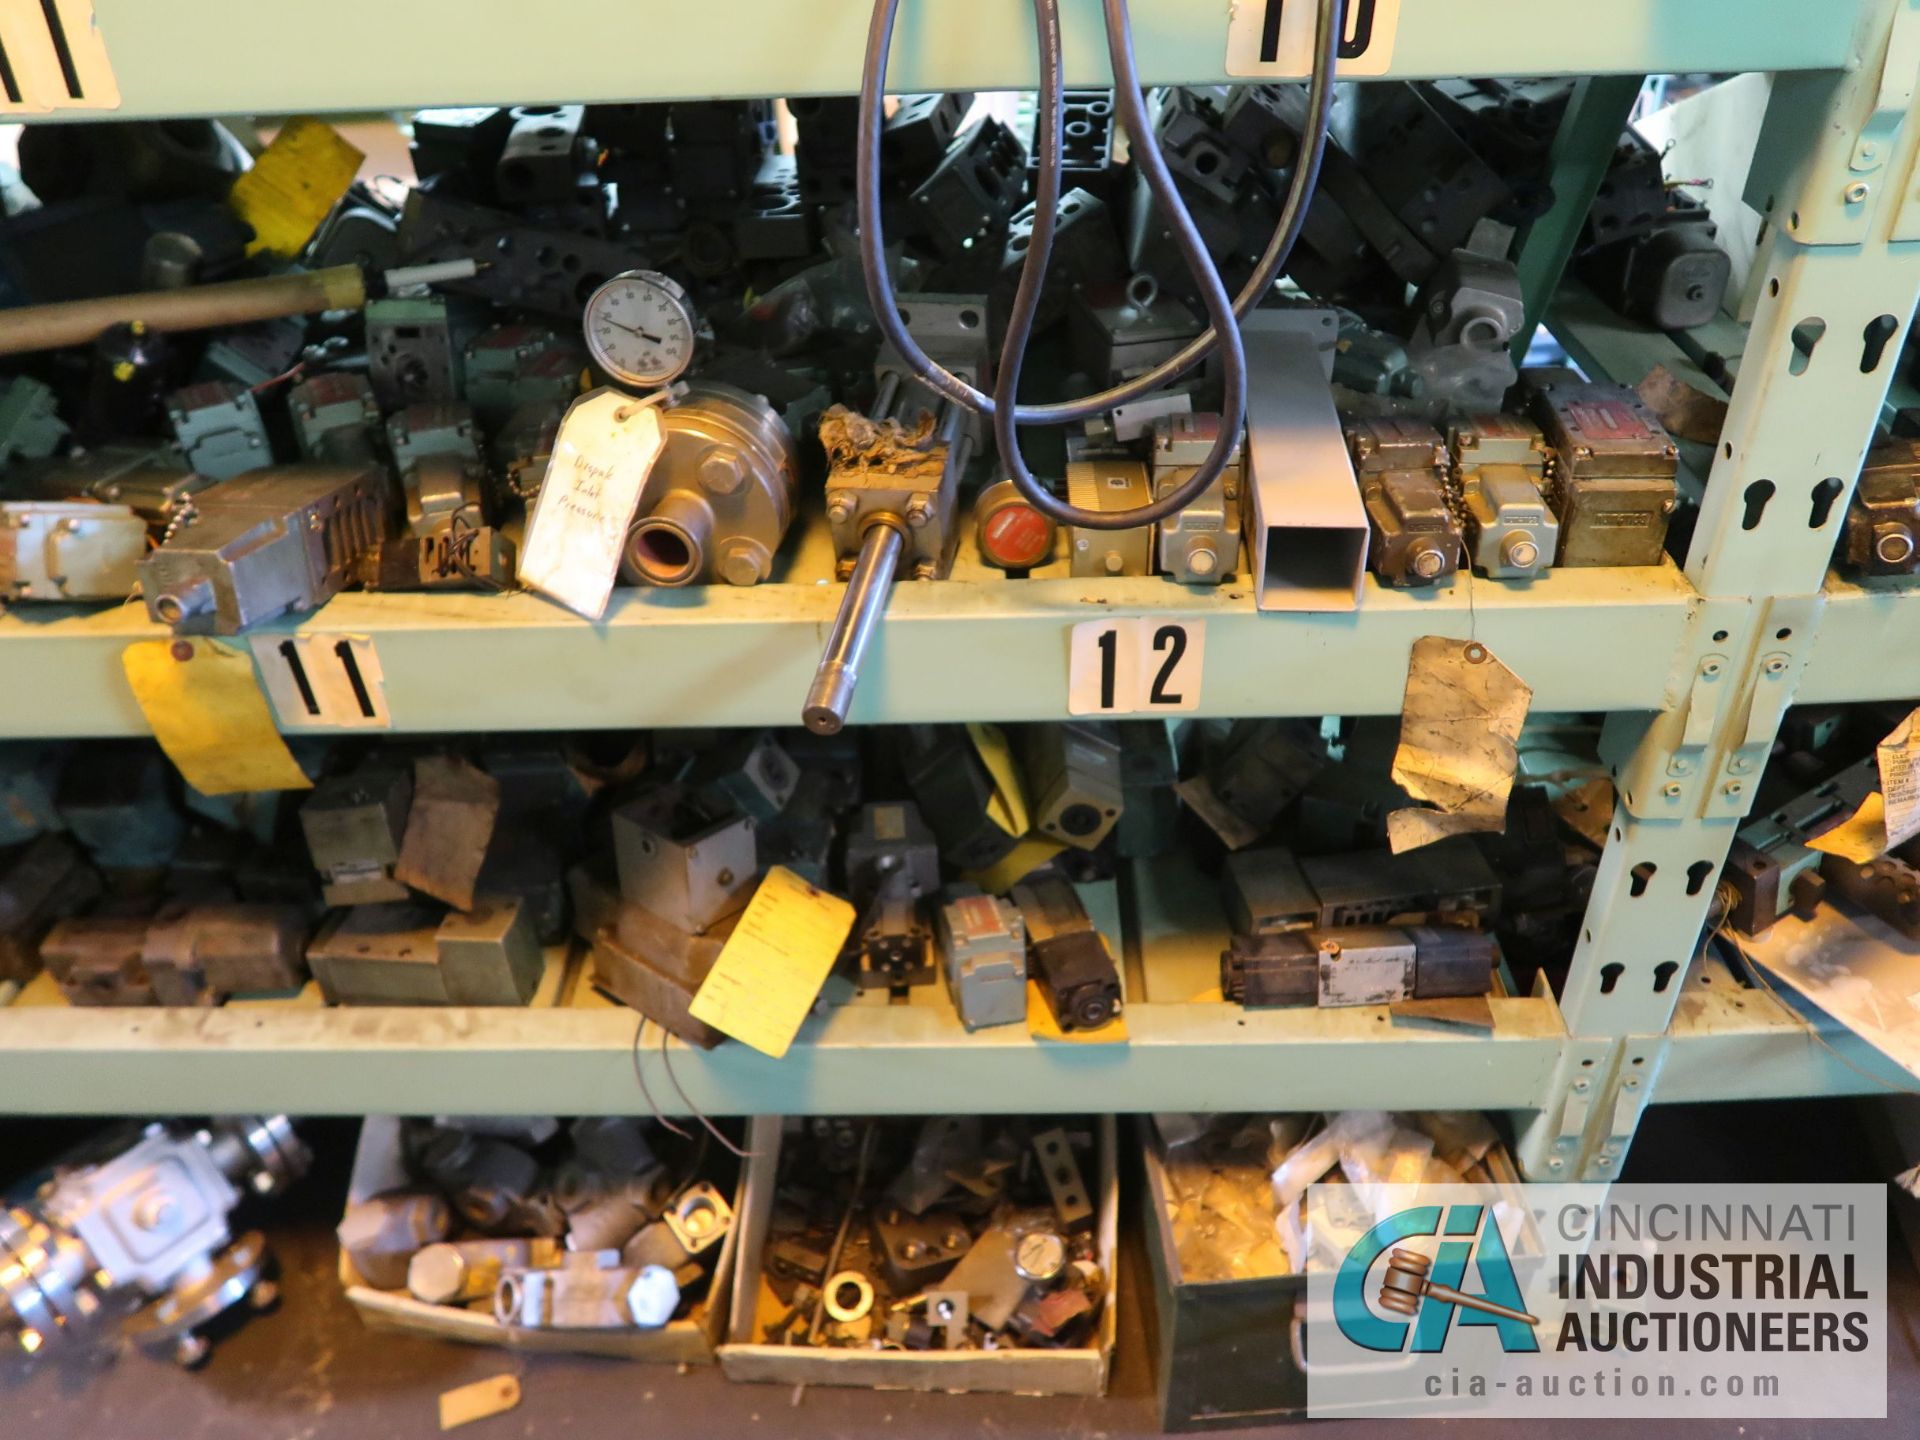 CONTENTS OF (6) RACKS INCLUDING MISCELLANEOUS PNEUMATIC CYLINDERS AND CONTROL VALVES **NO RACKS** - Image 7 of 39